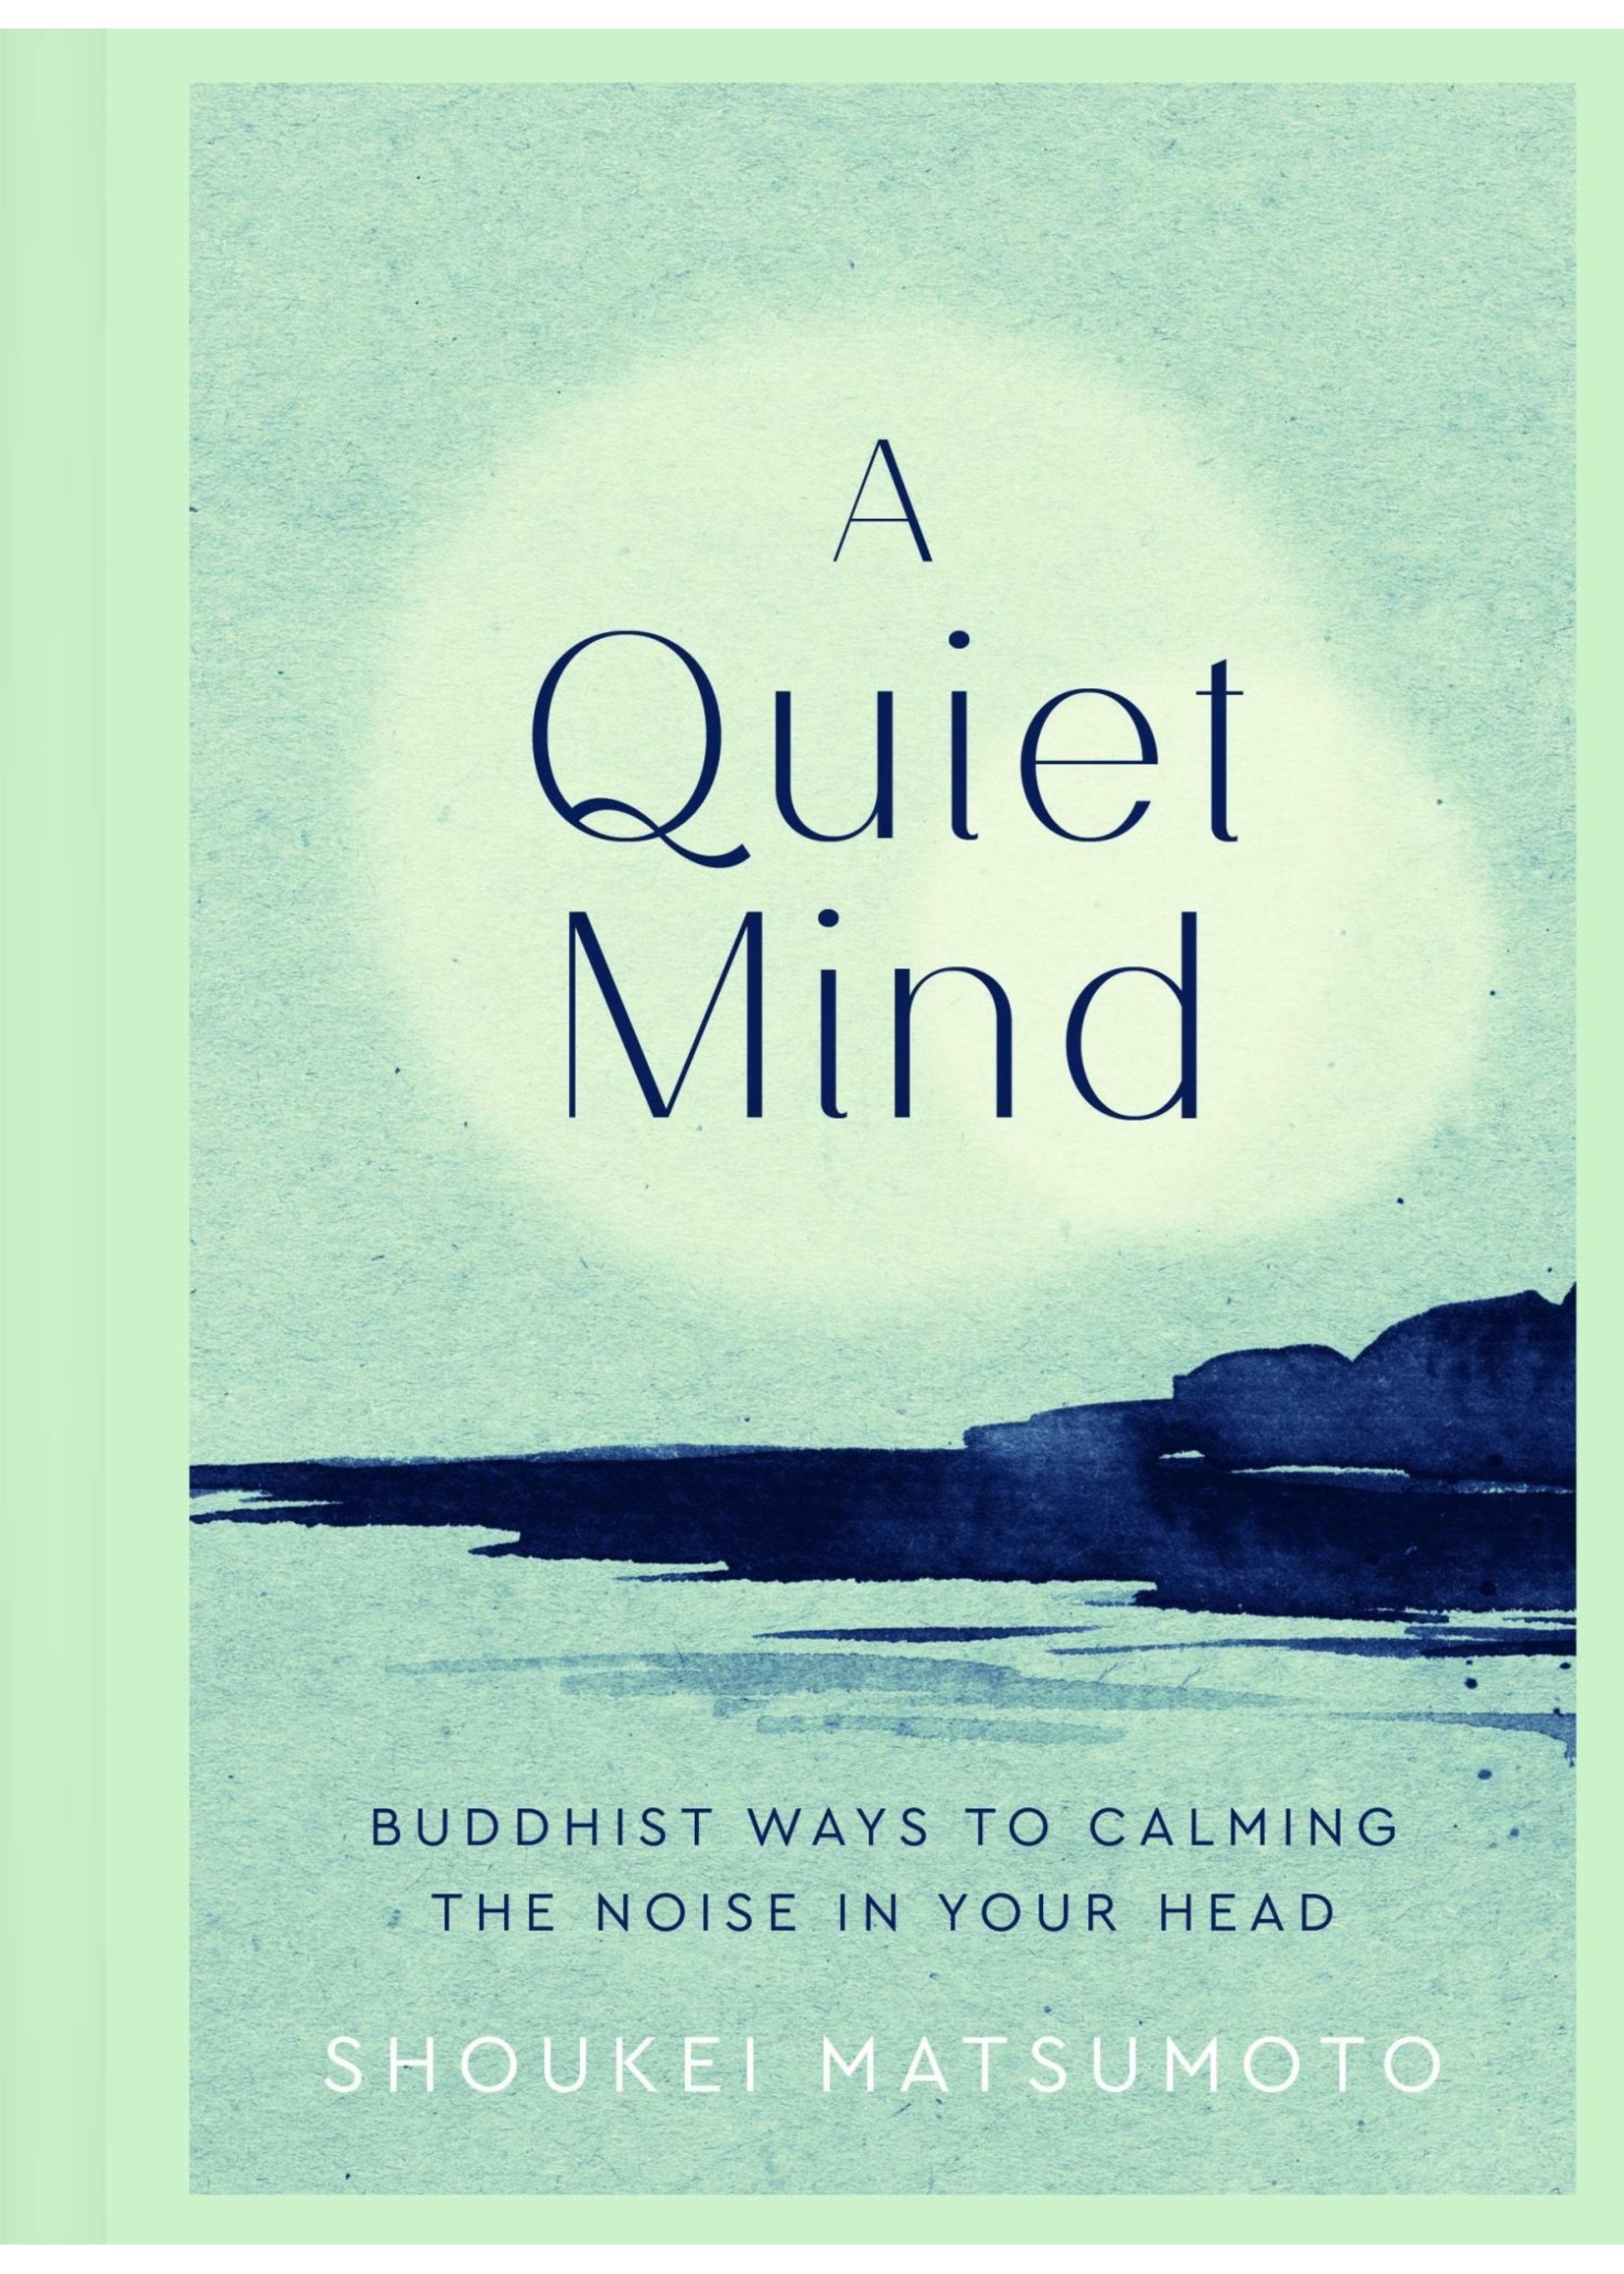 A Quiet Mind- The Buddhits Way to Calm the Noise in Your Head